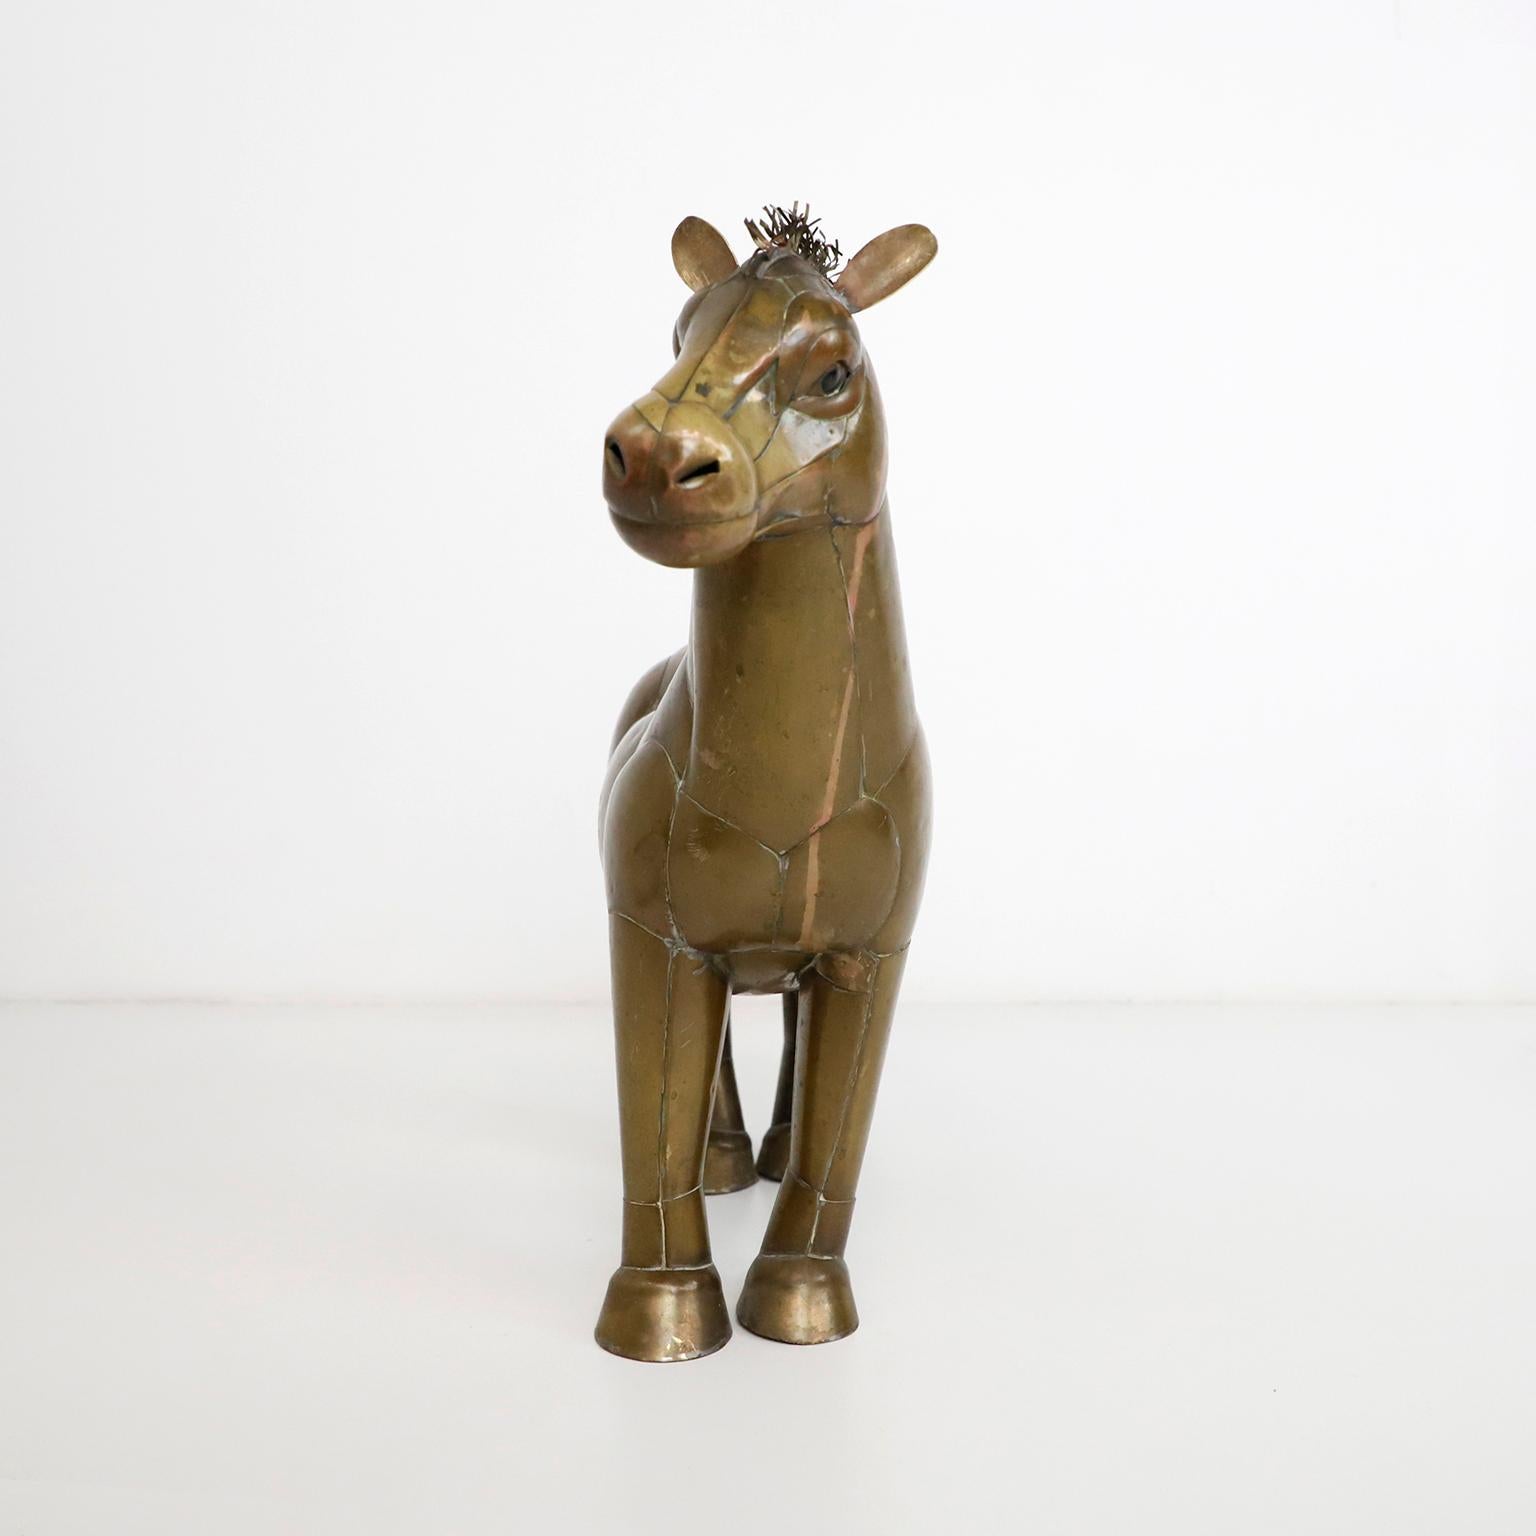 Circa 1960. We offer this Copper and Brass Horse Figure attributed to Sergio Bustamante.